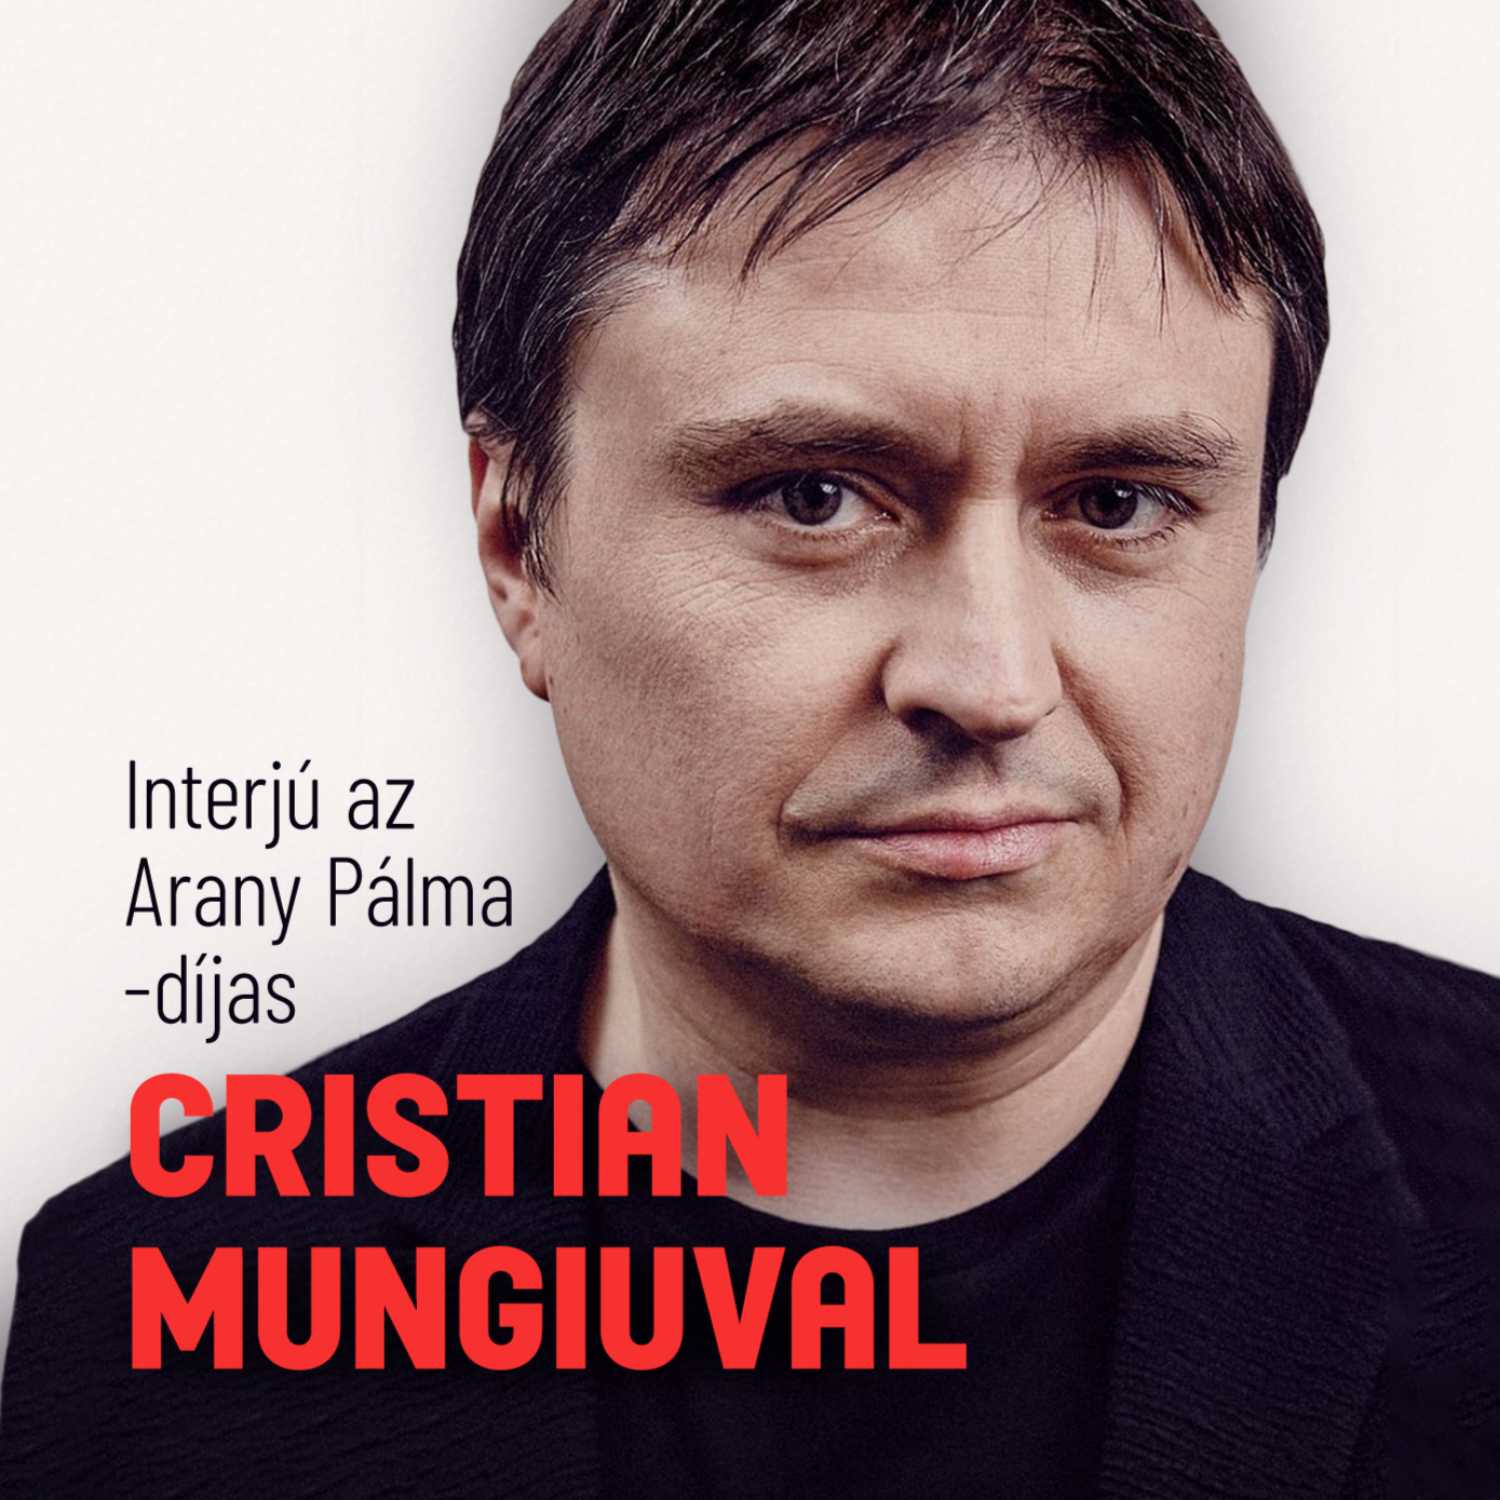 Resisting bigotry and corruption with camera - Interview with Cristian Mungiu